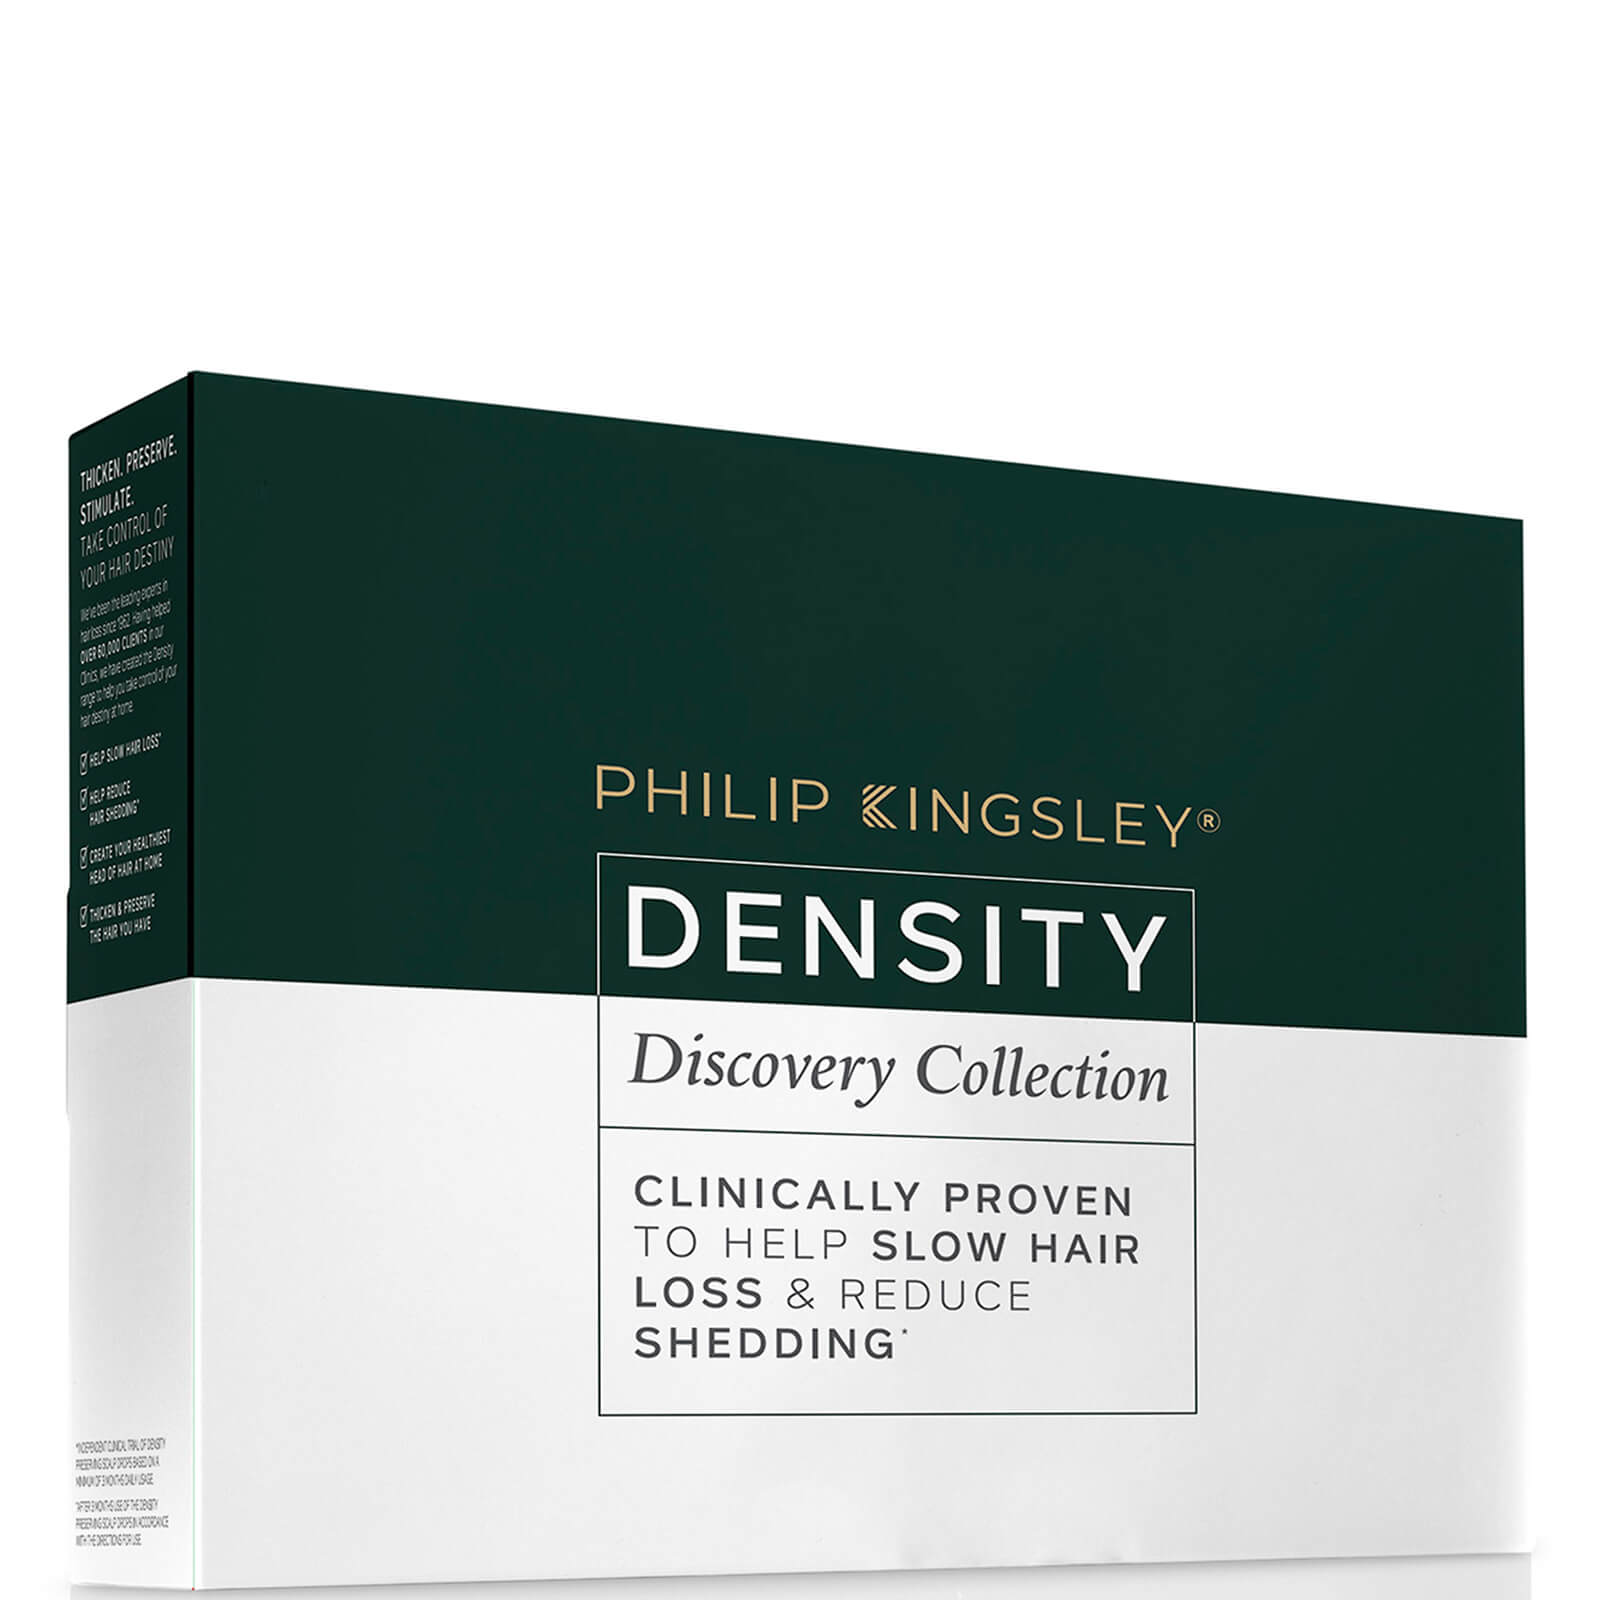 Image of Philip Kingsley Density Discovery Collection